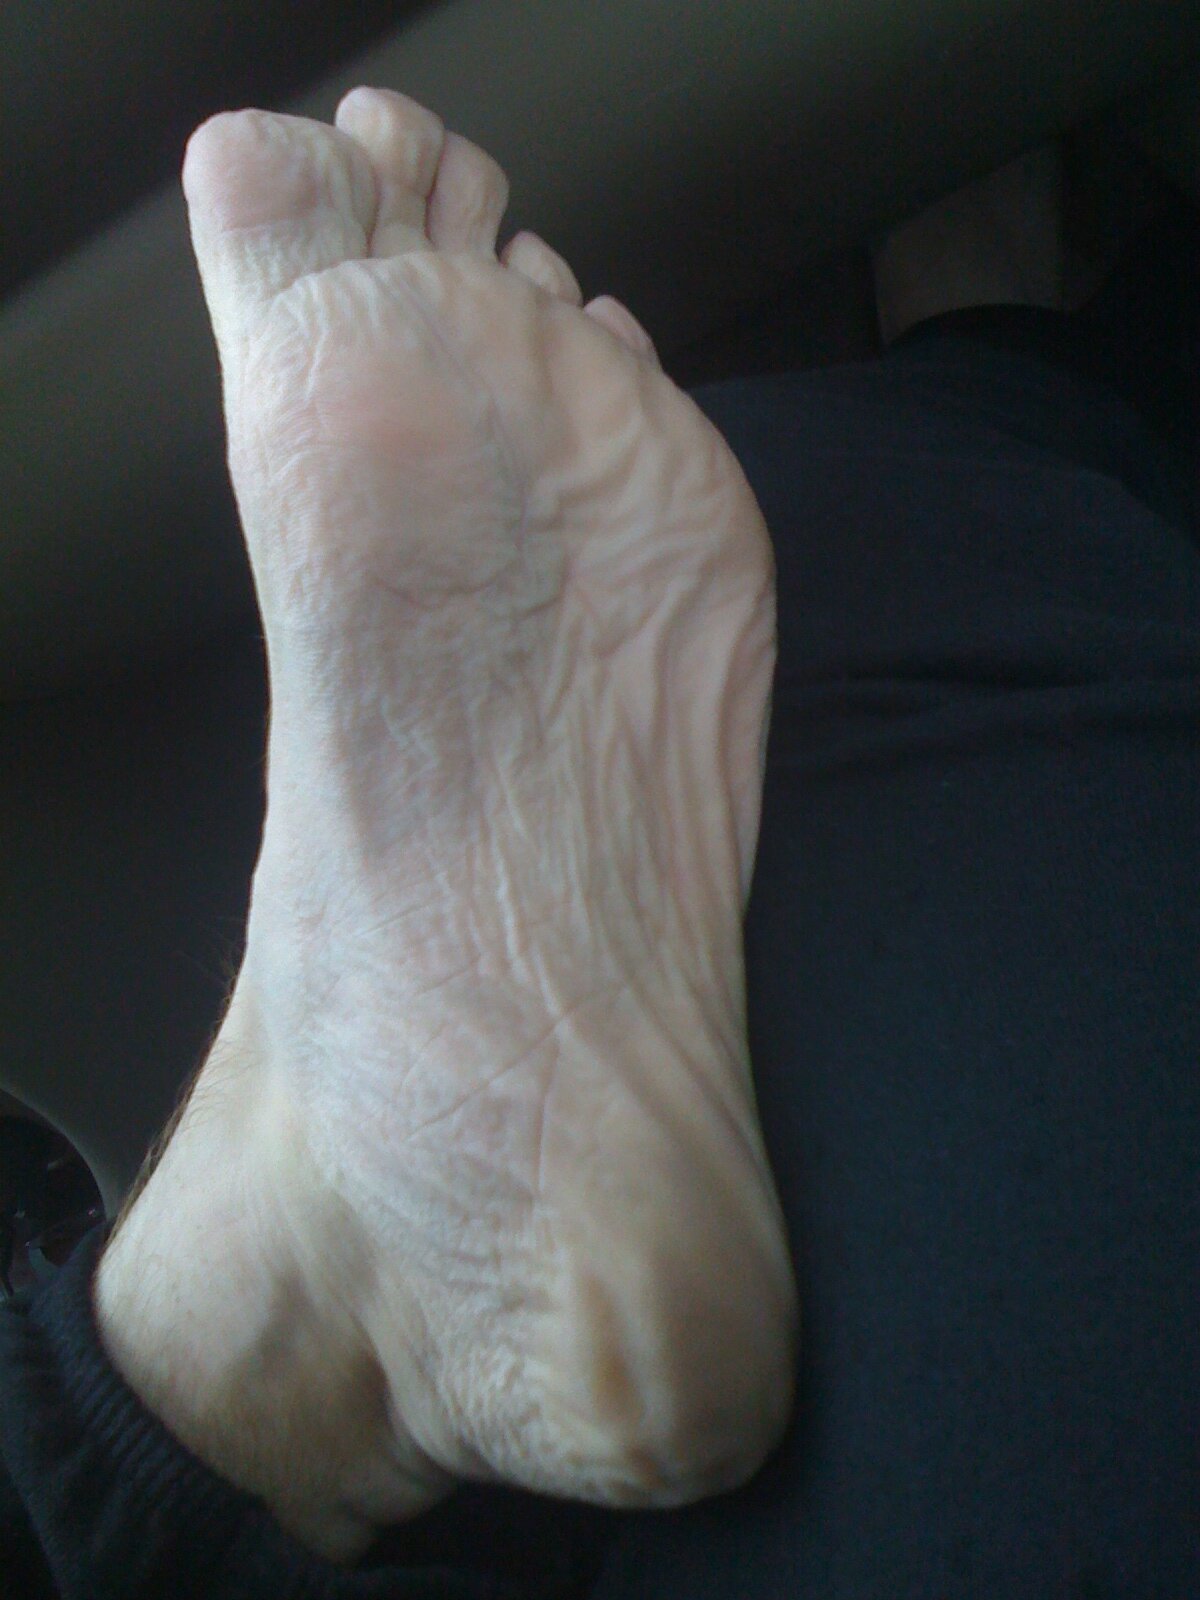  My poor foot after the race. It was pure heaven putting on clean, dry white socks, just heaven. 